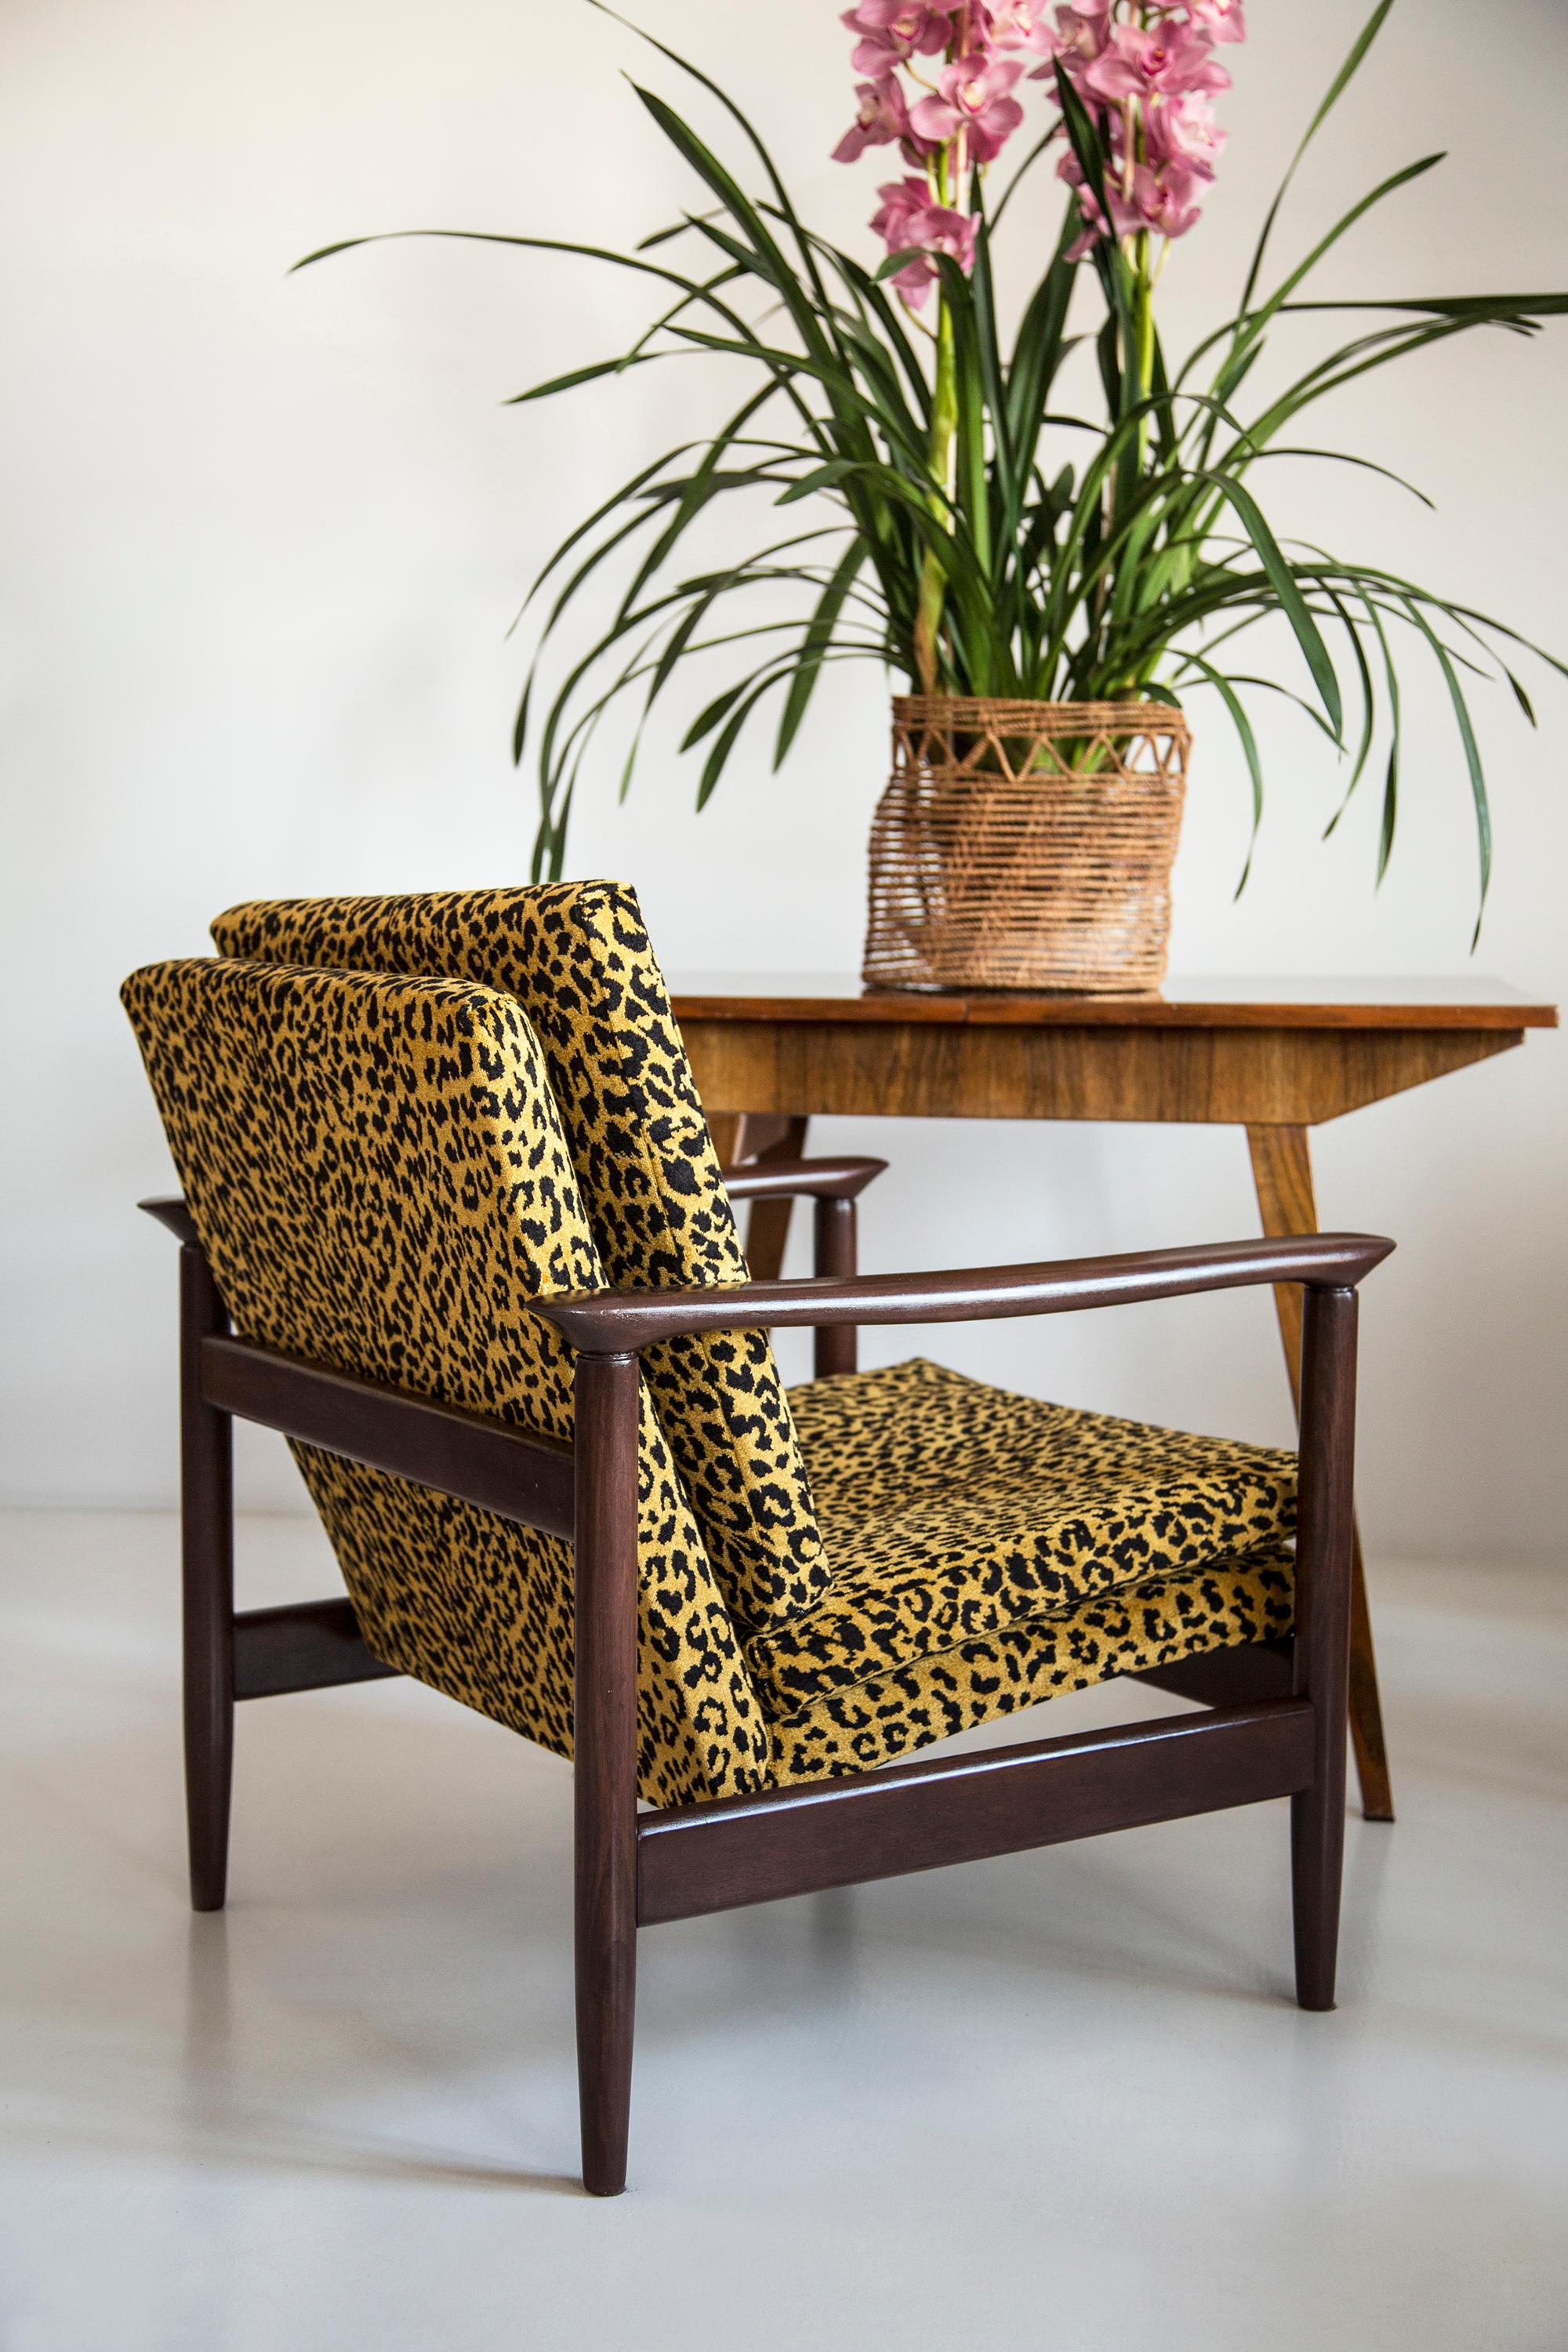 Beautiful leopard armchair GFM-142, designed by Edmund Homa, a polish architect, designer of industrial design and interior architecture, professor at the Academy of Fine Arts in Gdansk. 

The armchair was made in the 1960s in the Gosciecinska